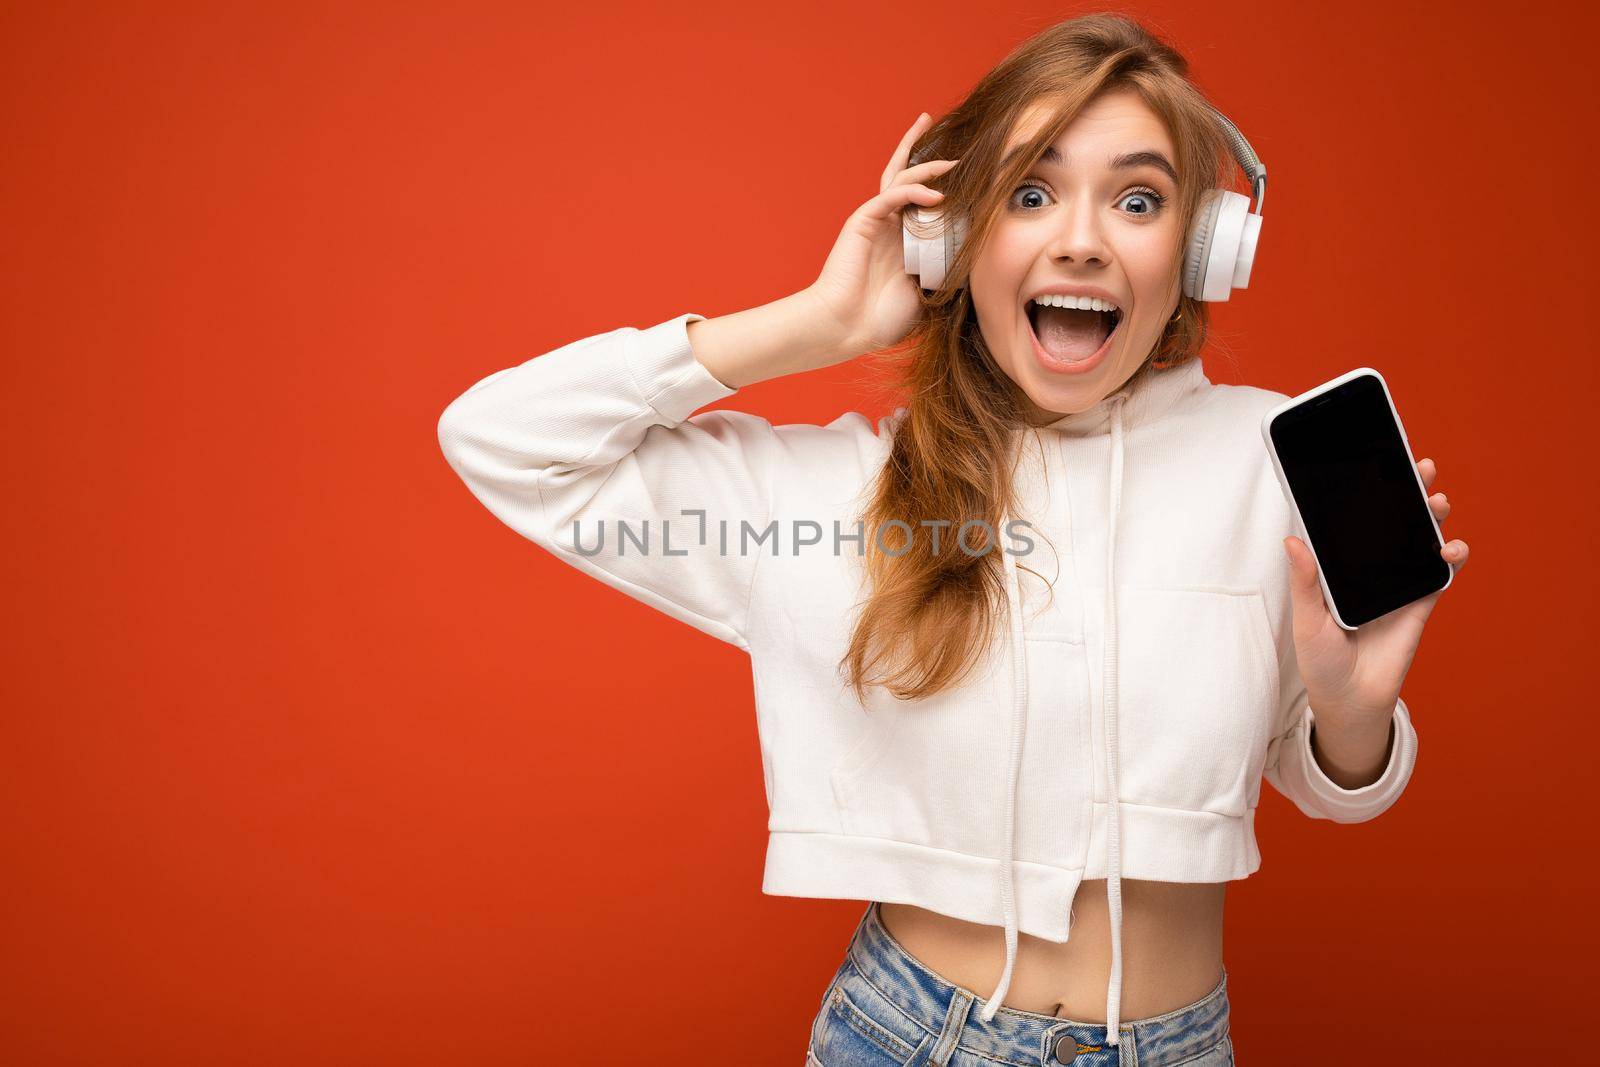 Beautiful positive amazed shocked young woman wearing stylish casual outfit isolated on background wall holding and showing mobile phone with empty display for mockup wearing white bluetooth headphones listening to music and having fun looking at camera.